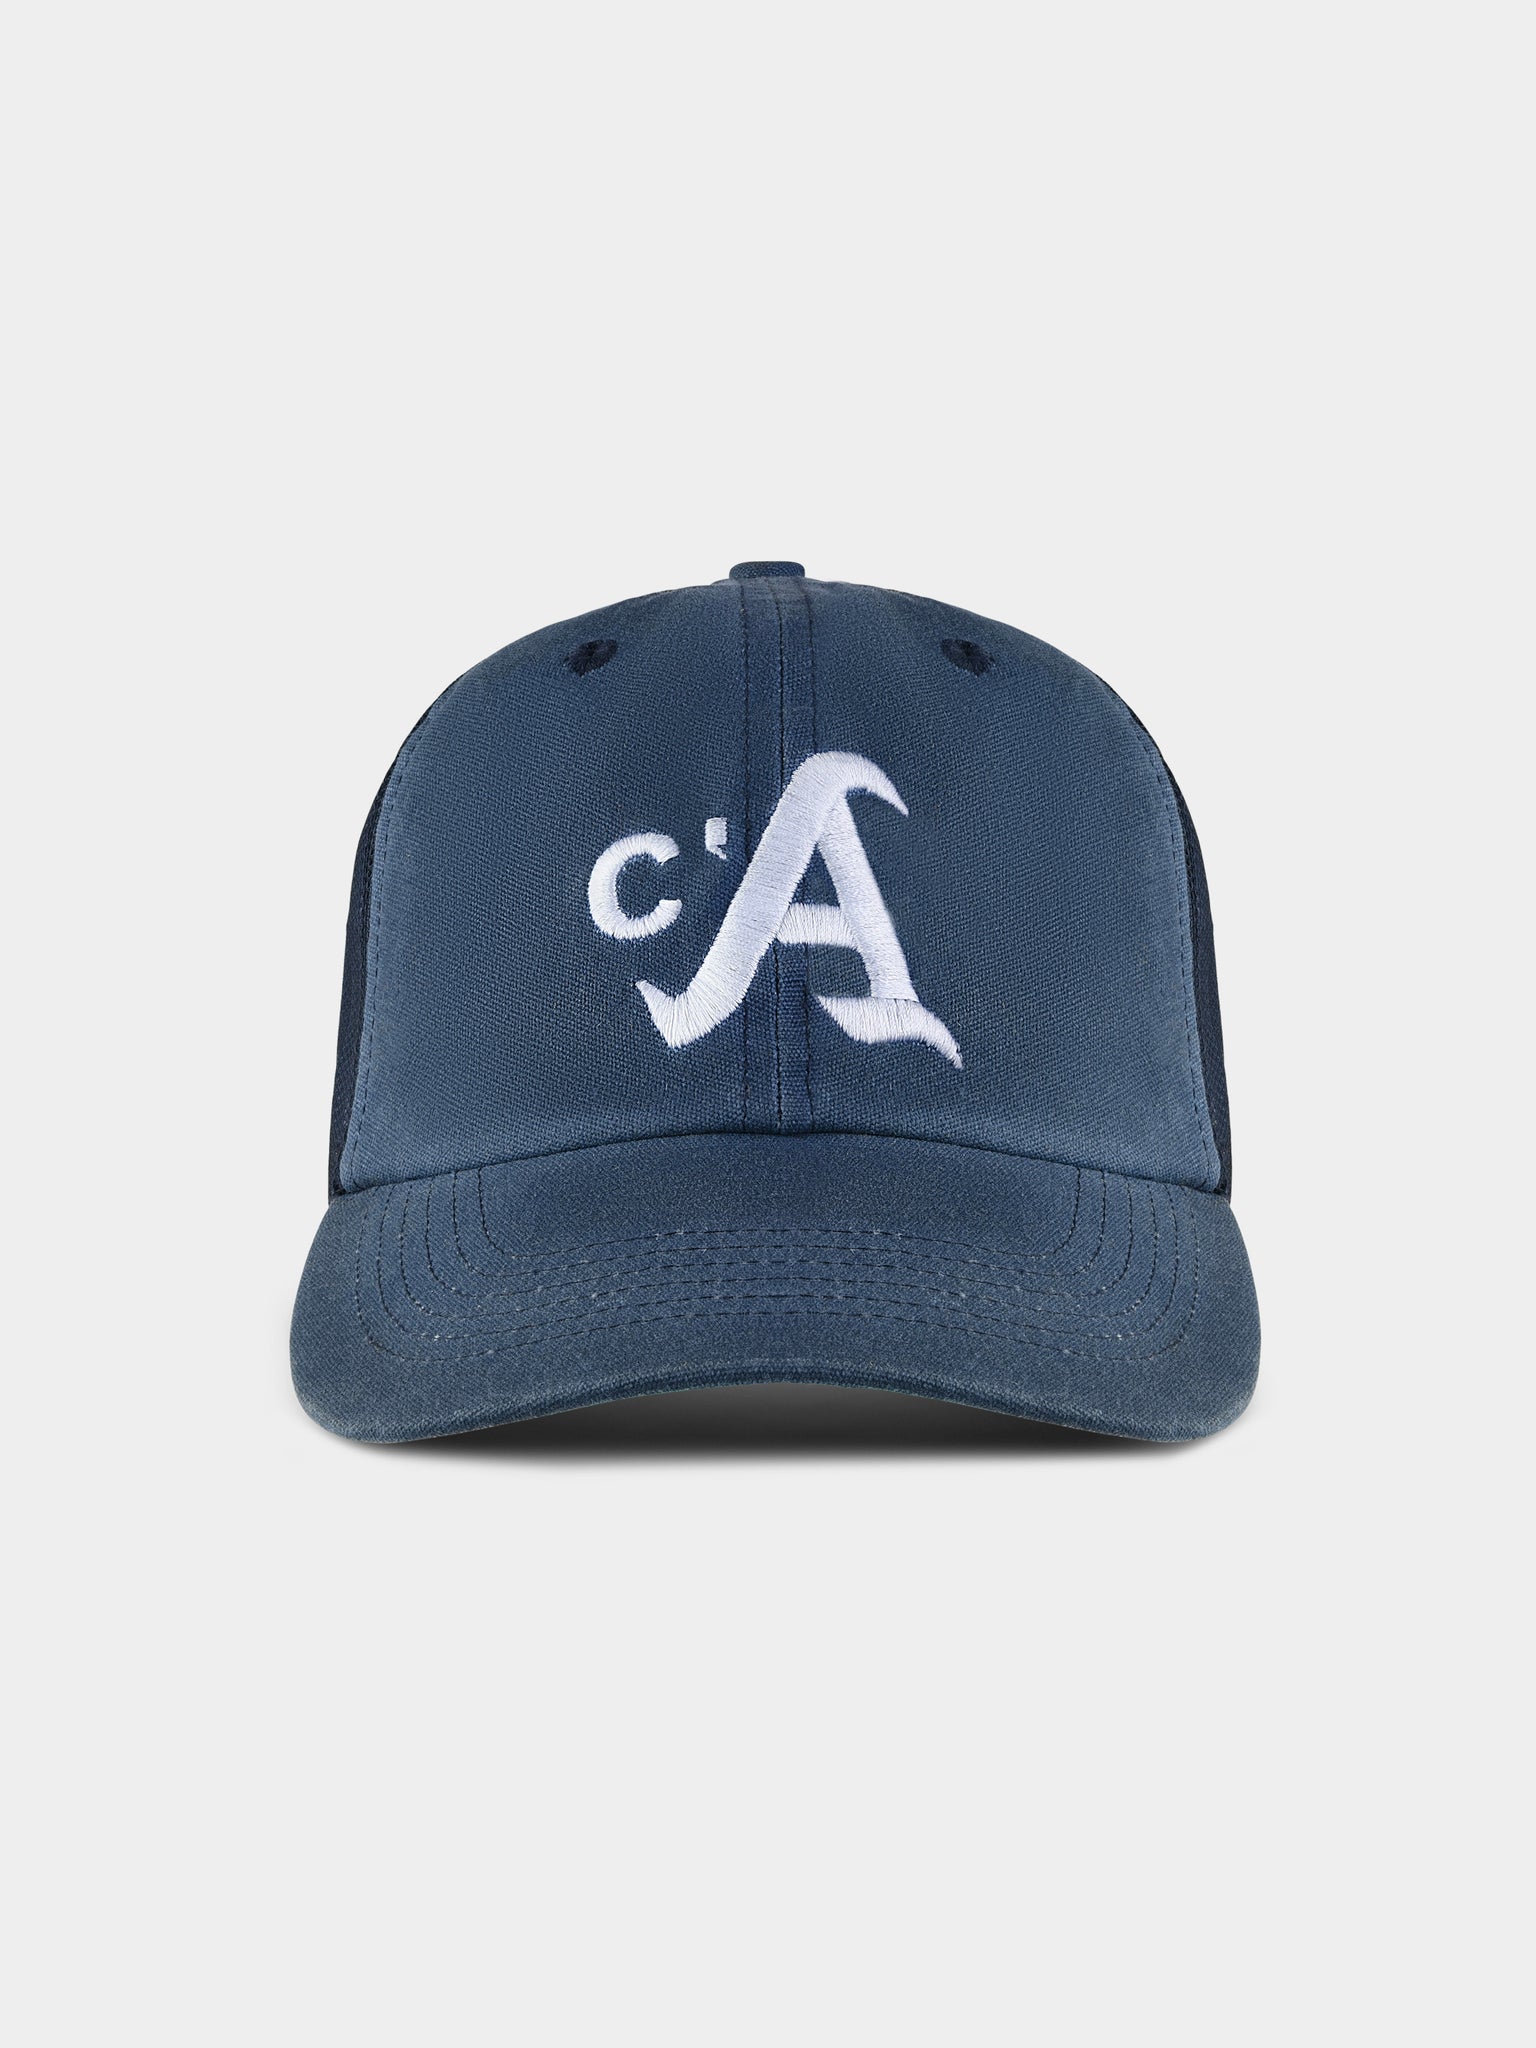 CA's Waxed Canvas Hat